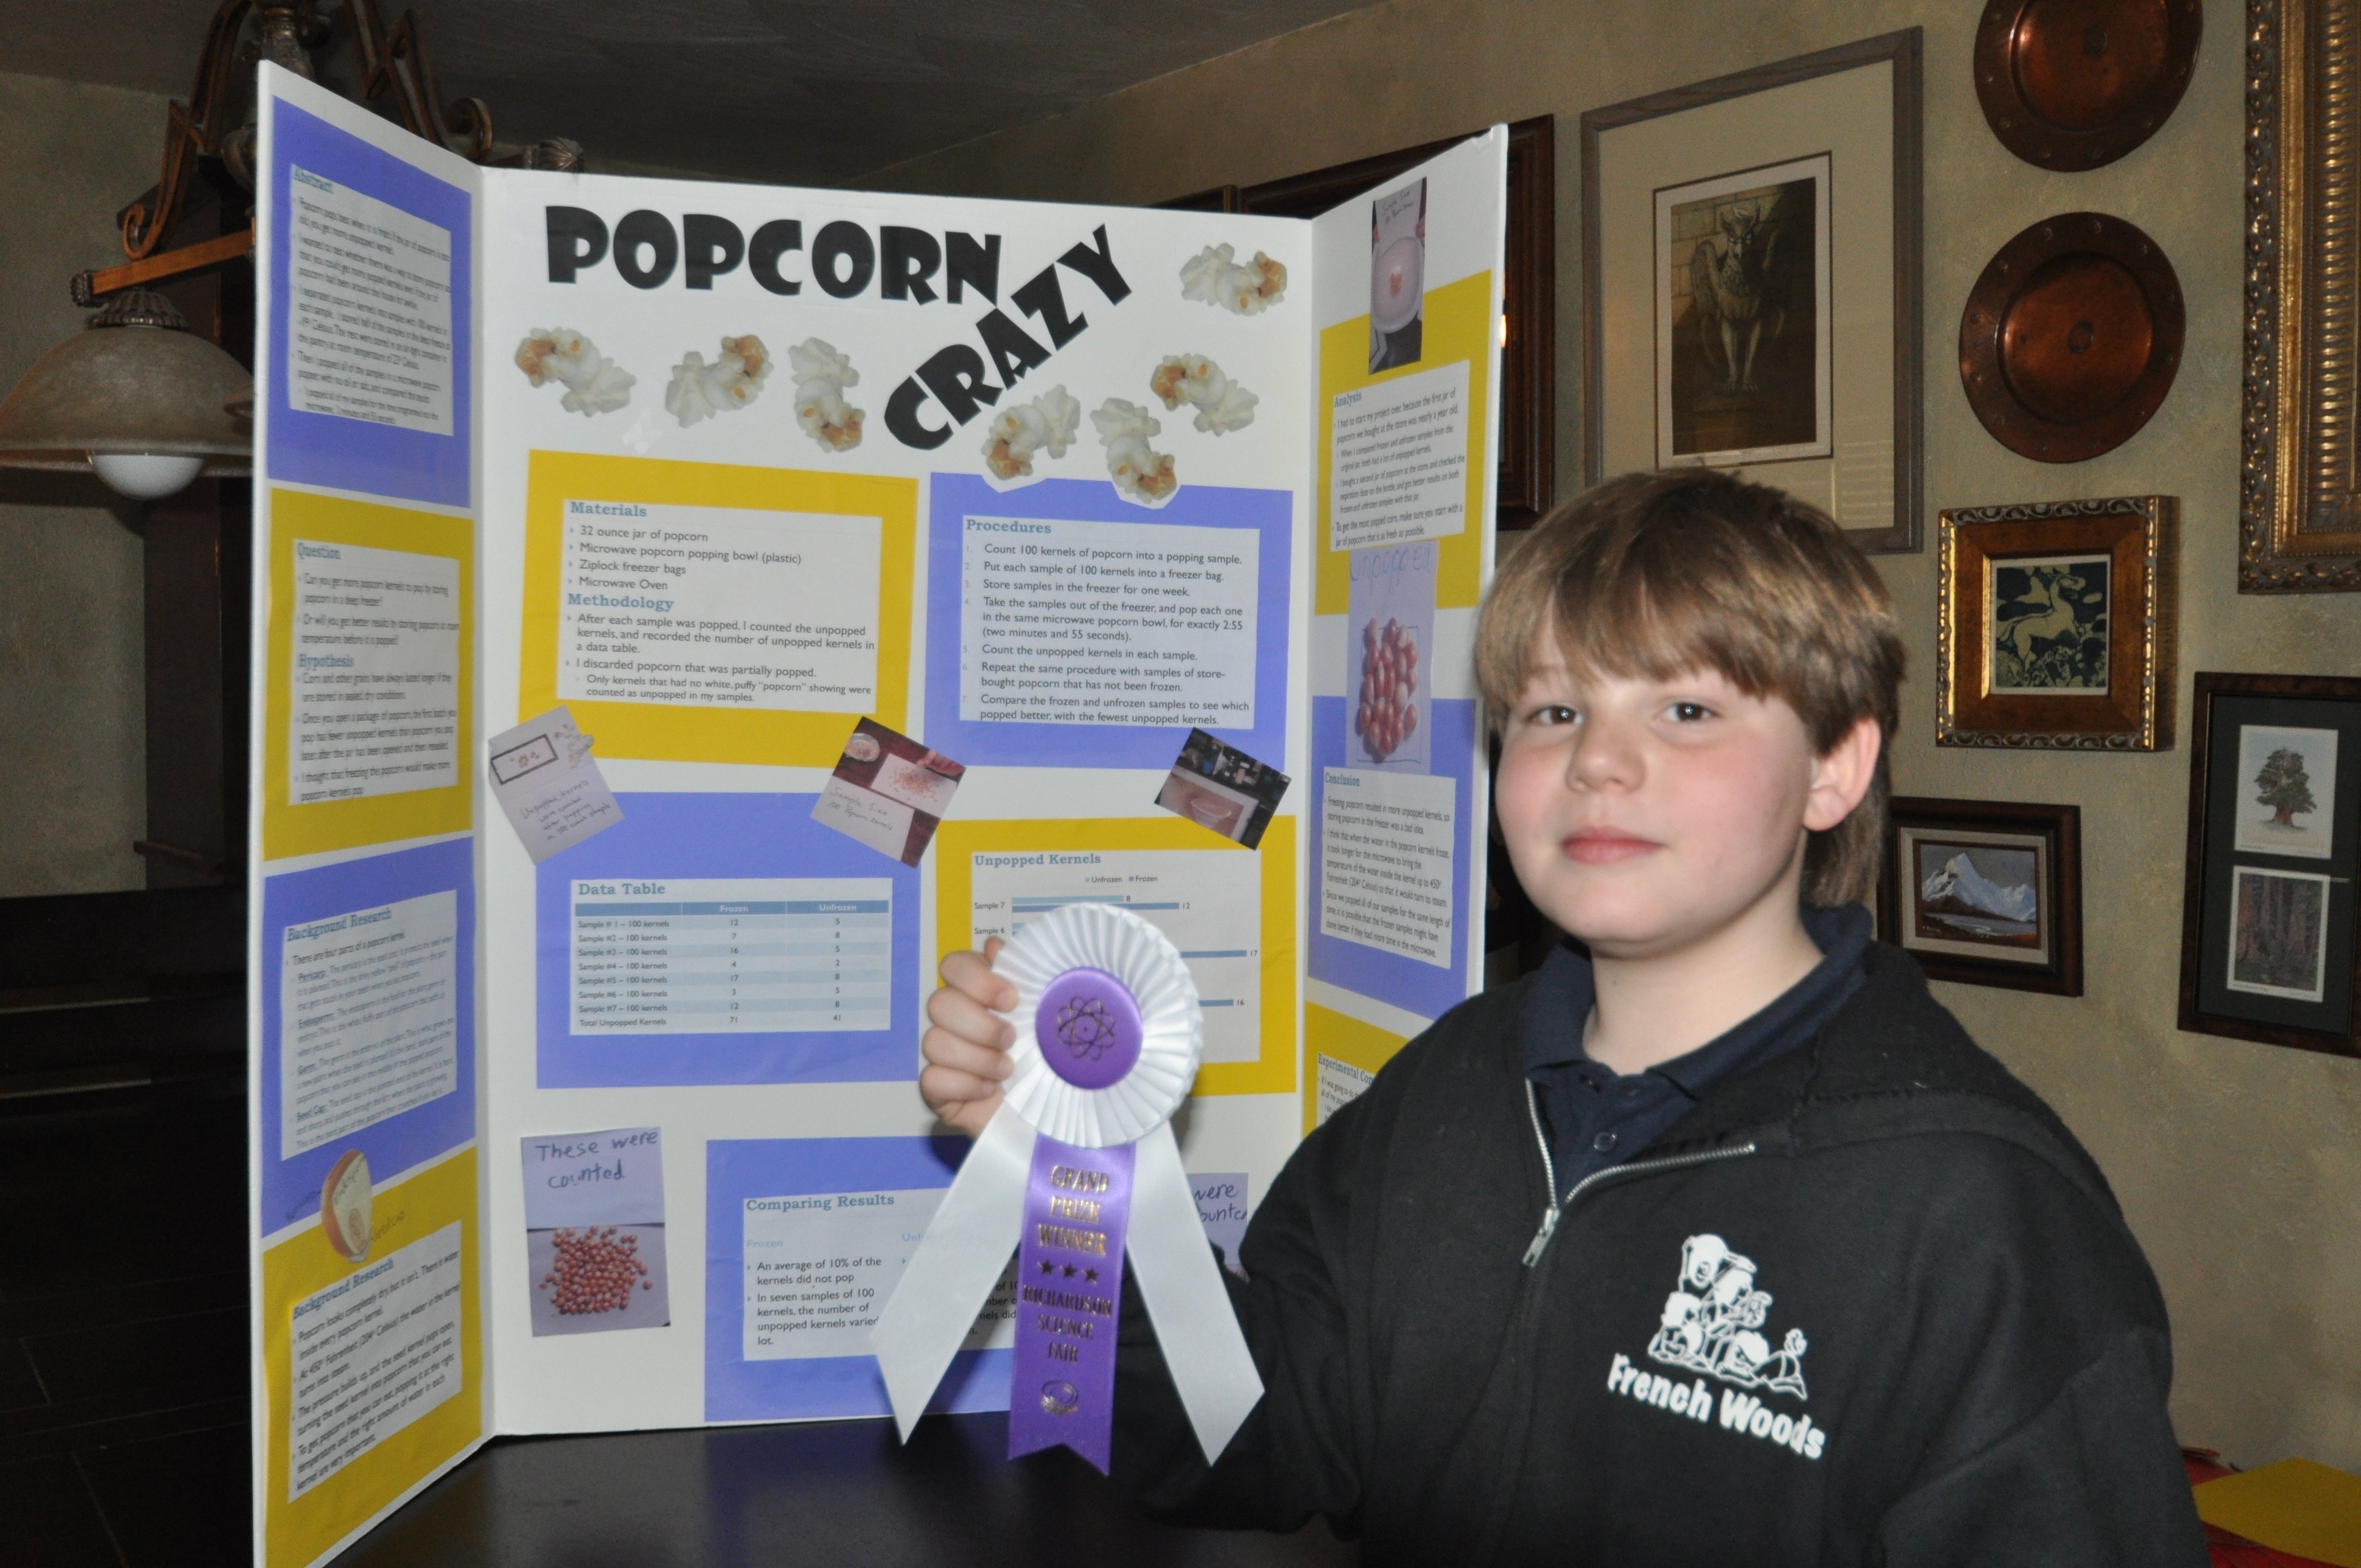 10 Pretty Elementary School Science Fair Project Ideas grand prize science fair project 2013 marketing where technology 3 2022